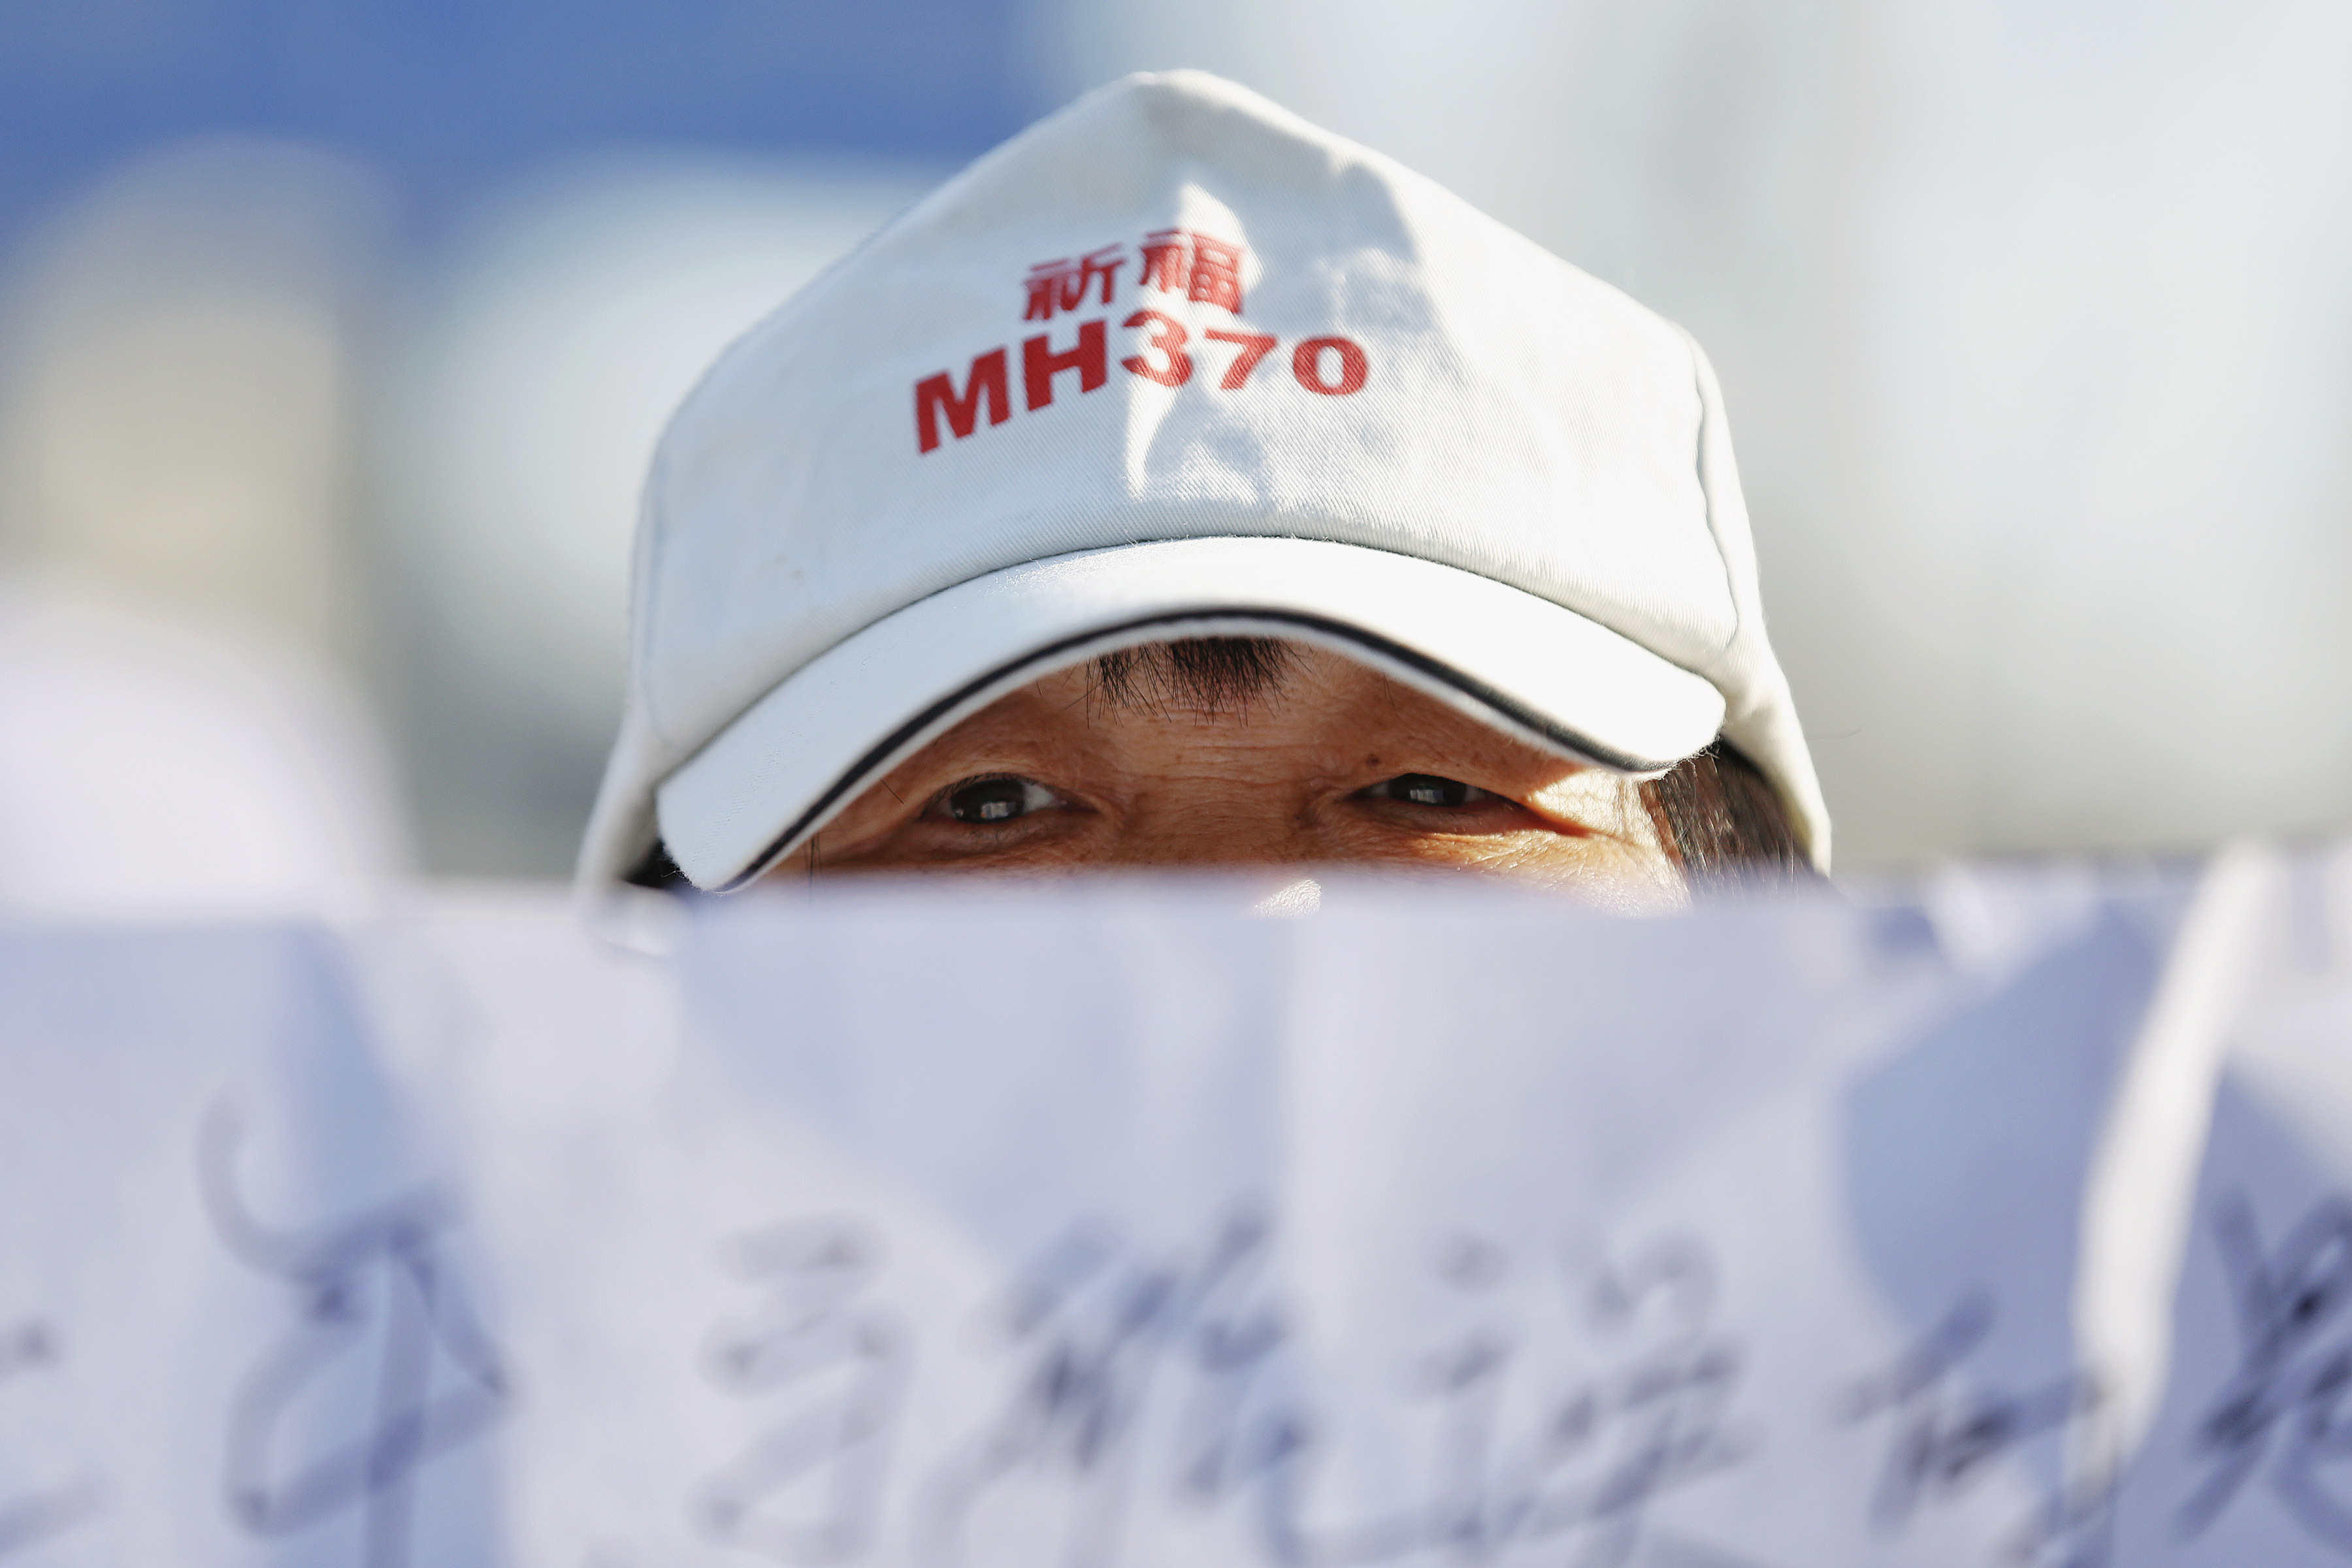 A family member of a passenger onboard Malaysia Airlines flight MH370 which went missing in 2014 holds a banner during a gathering in front of the Malaysian Embassy on the second anniversary of the disappearance of MH370, in Beijing